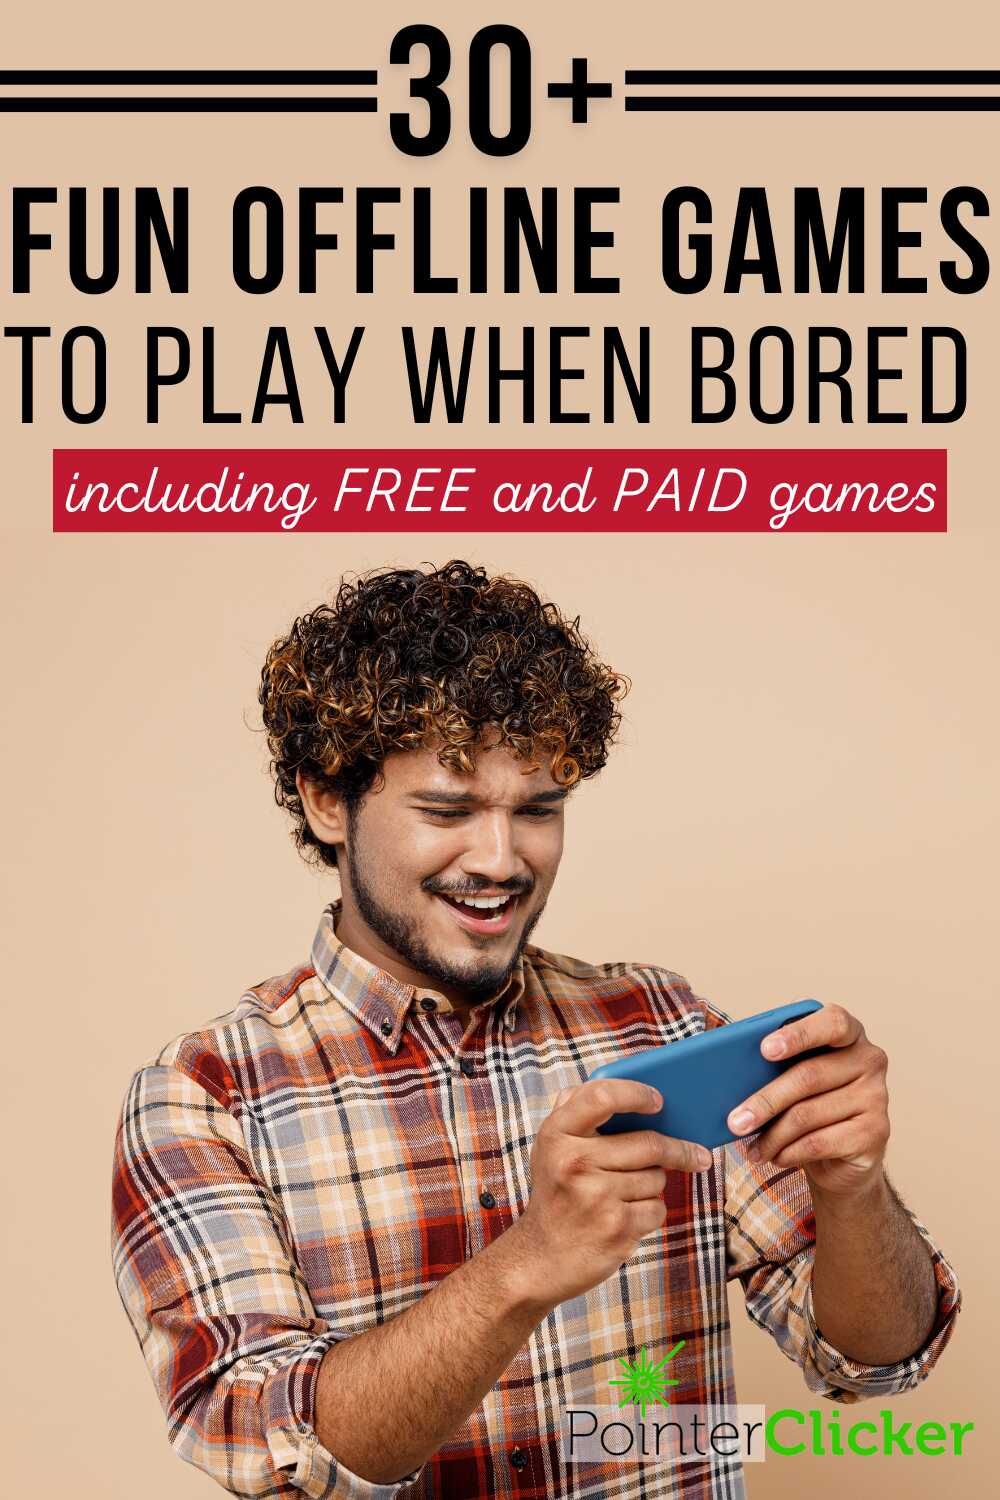 30+ fun offline games to play when bored - including Free and Paid games